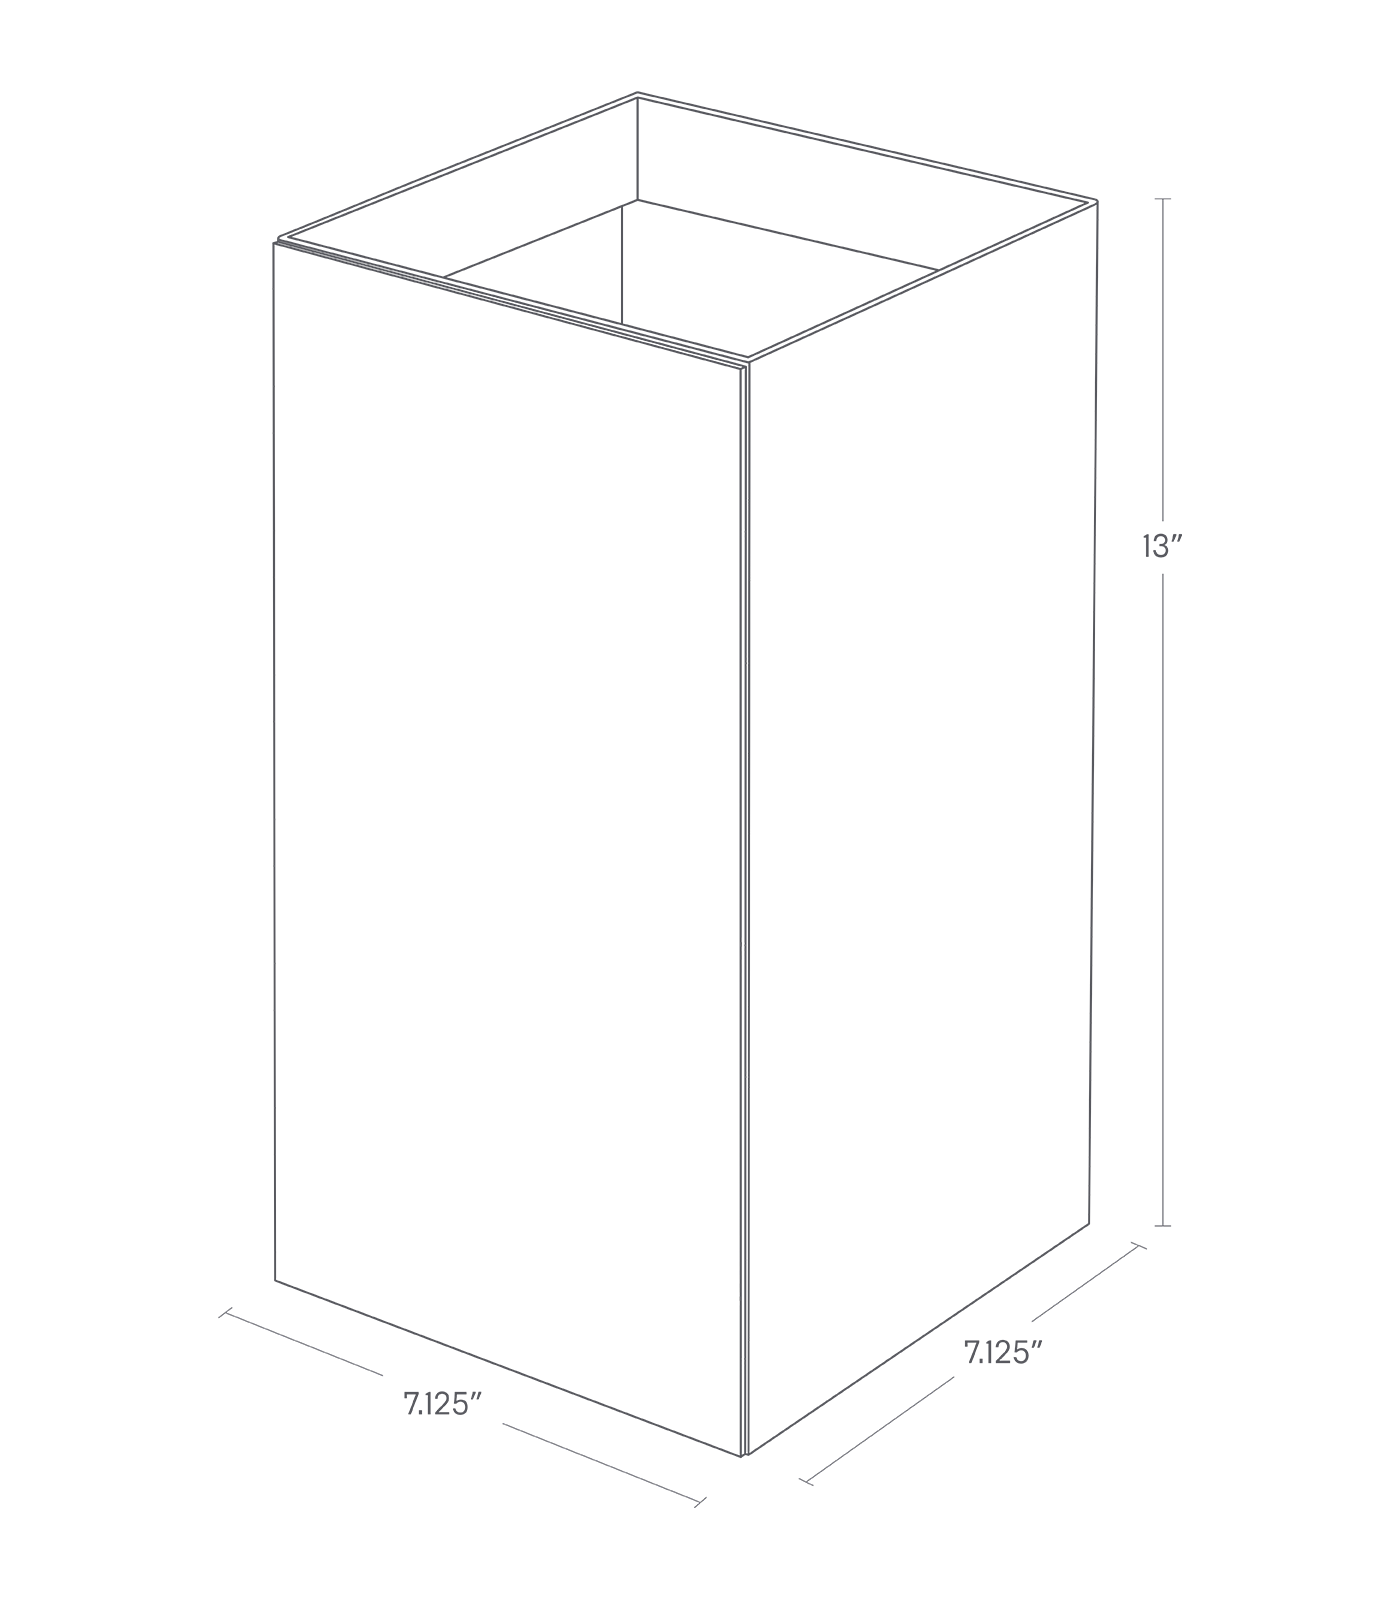 TOWER Trash Can. Size: Short. 13 inches tall, 7.125 inches long, 7.125 inches wide.